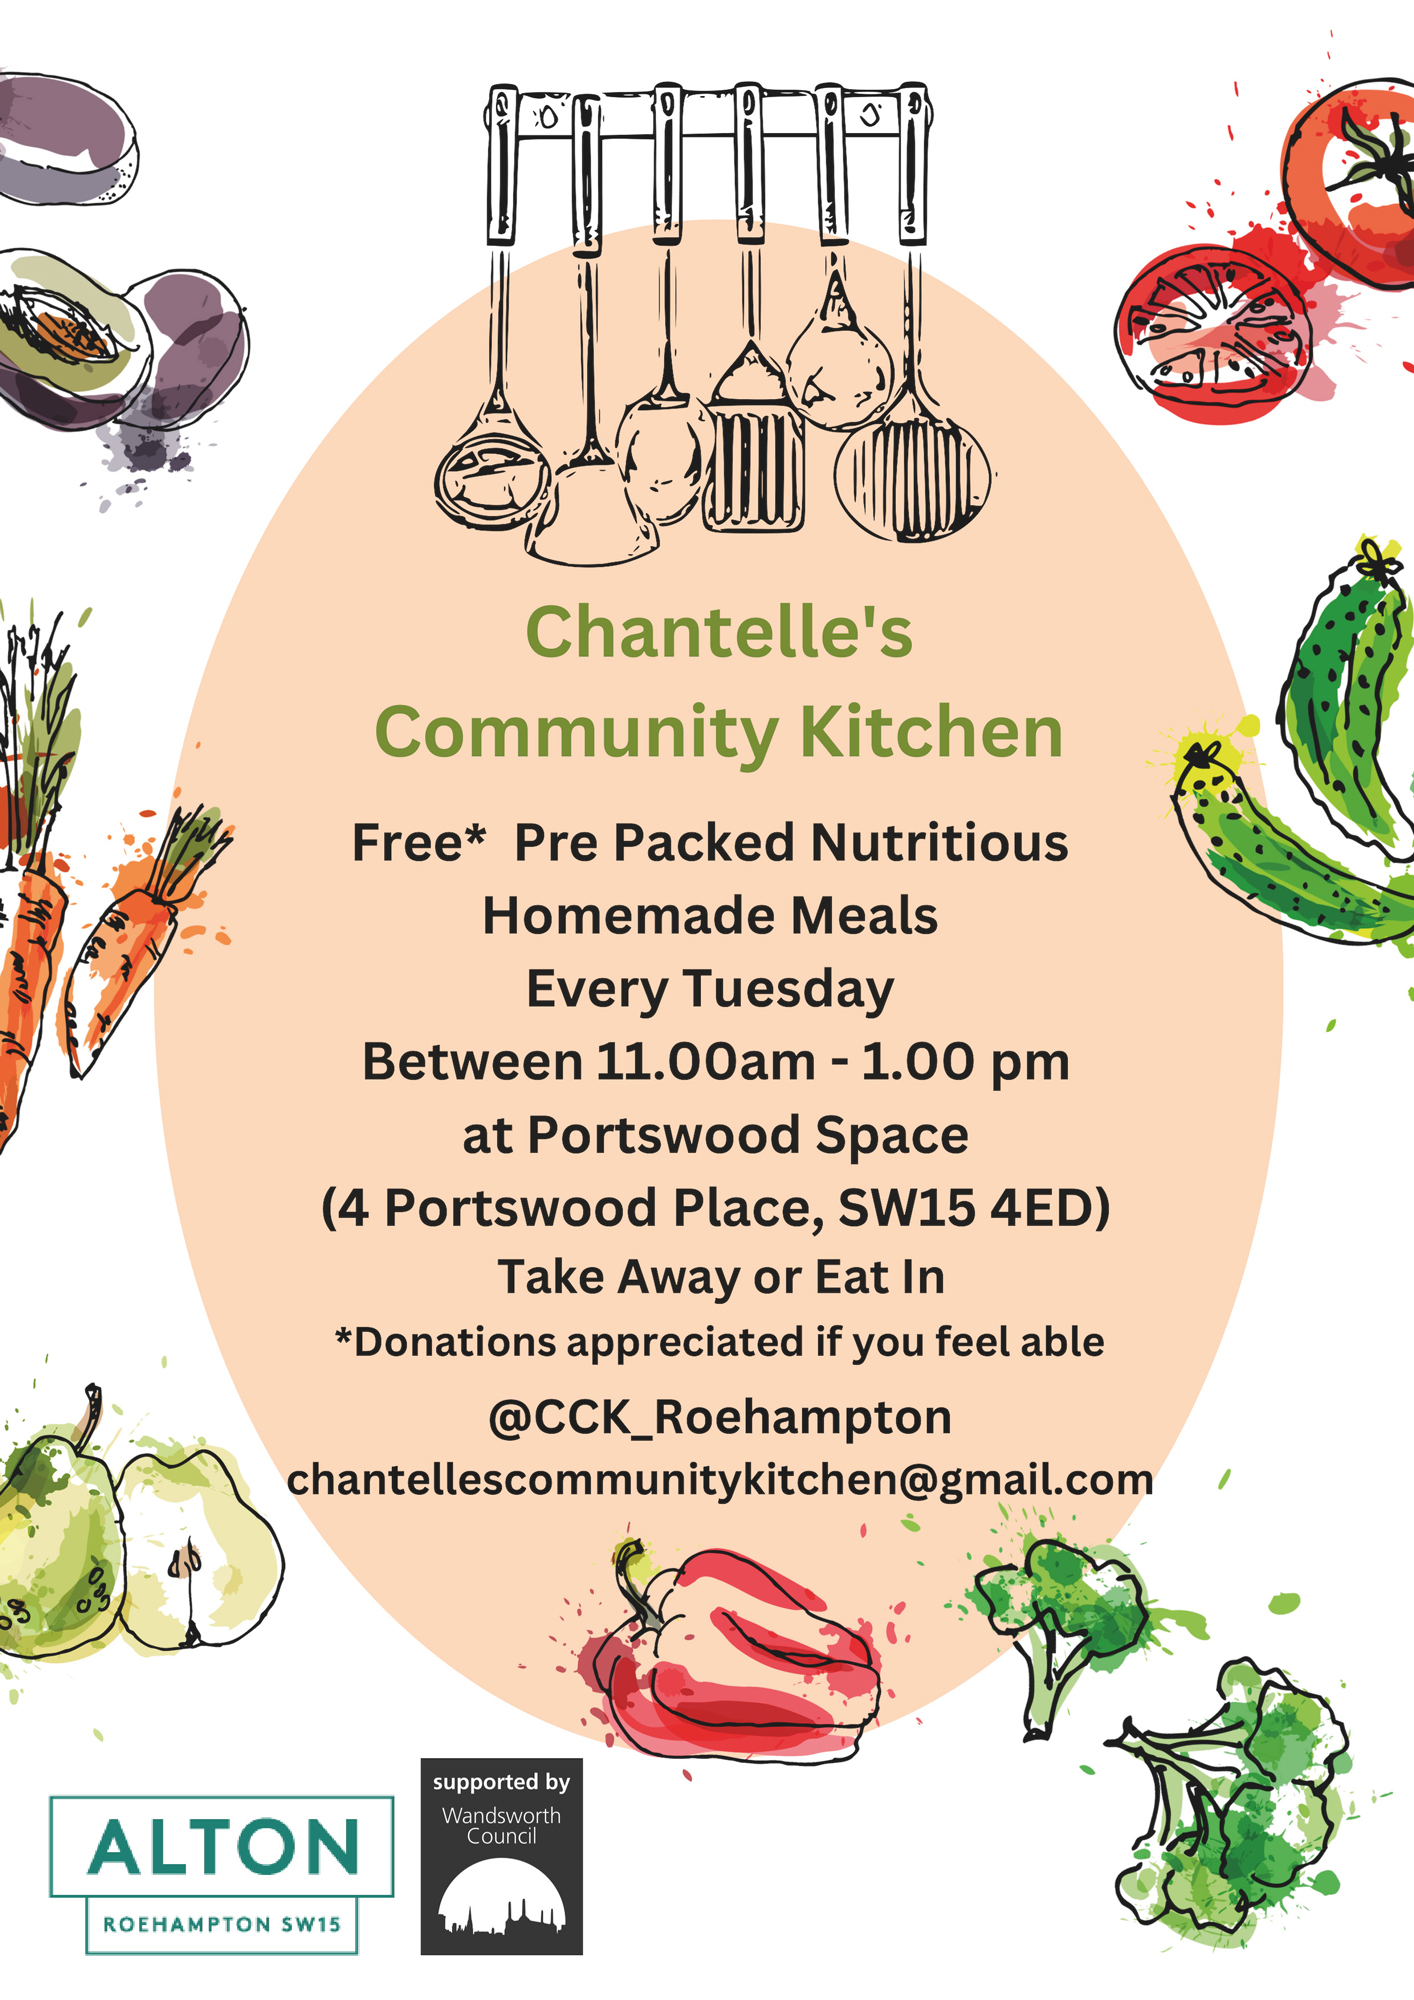 A poster advertising Chatelle's Community Kitchen, featuring illustrations of healthy fruit and vegetables including tomatoes, plums, carrots, courgettes, pears and broccoli